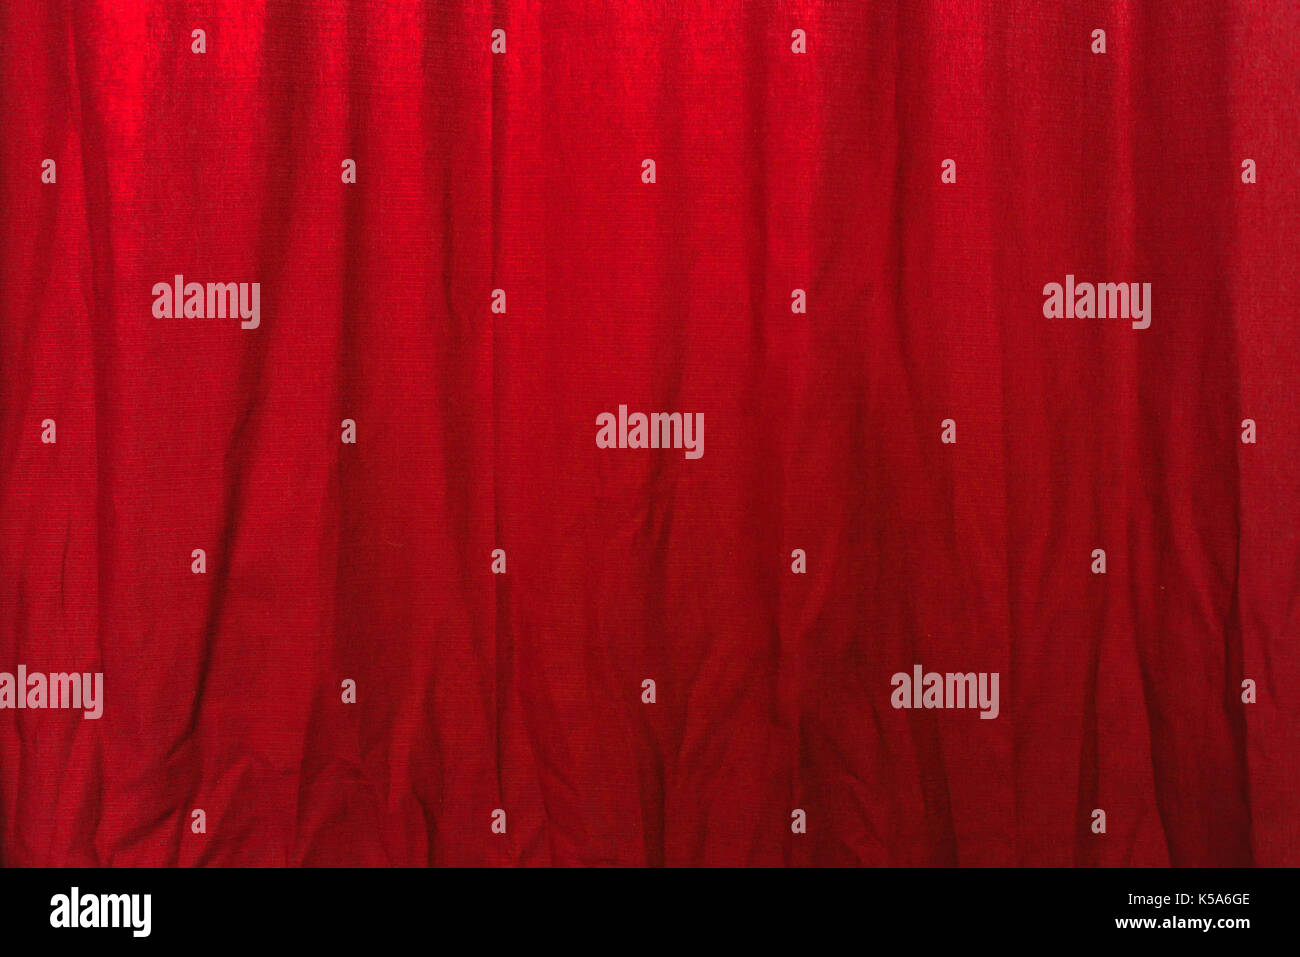 Wrinkled red curtain texture, cloth material with wrinkles as background Stock Photo